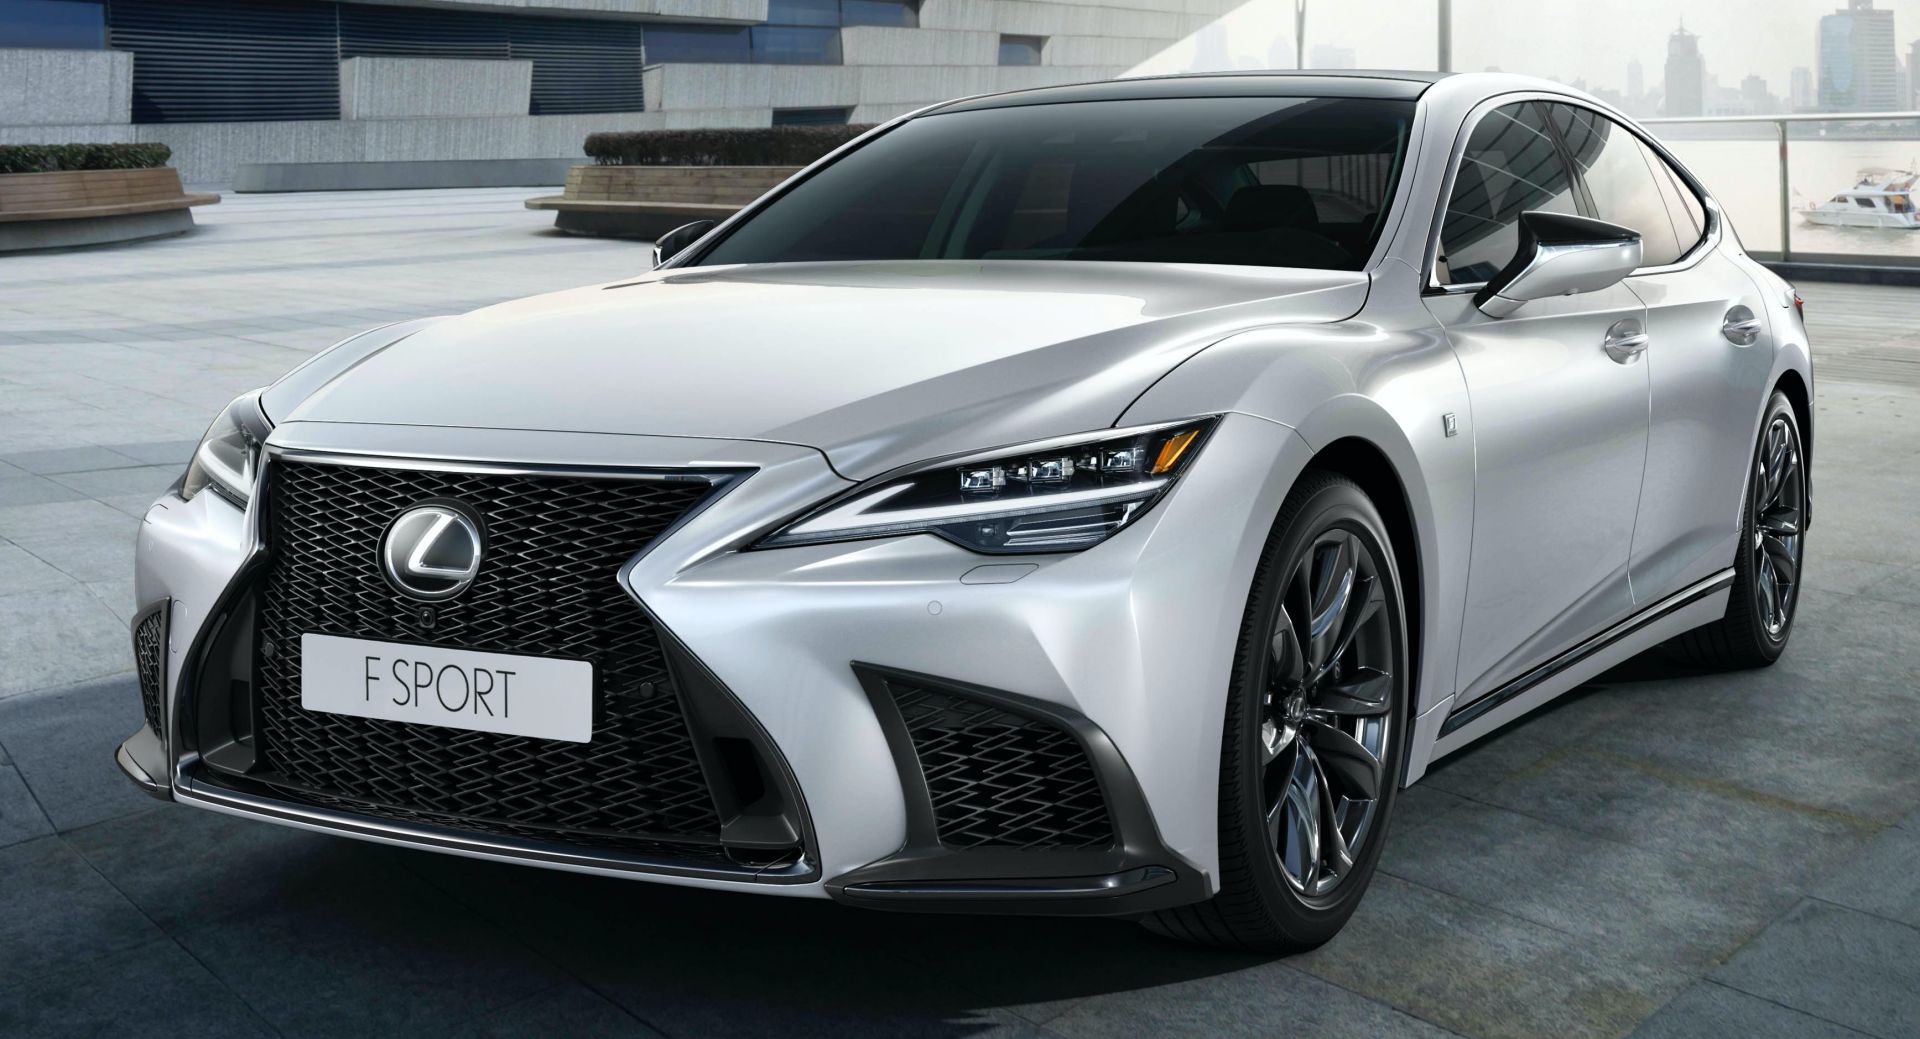 2021 Lexus LS Facelift Makes European Debut, Will Be Hybrid-Only In The EU  | Carscoops